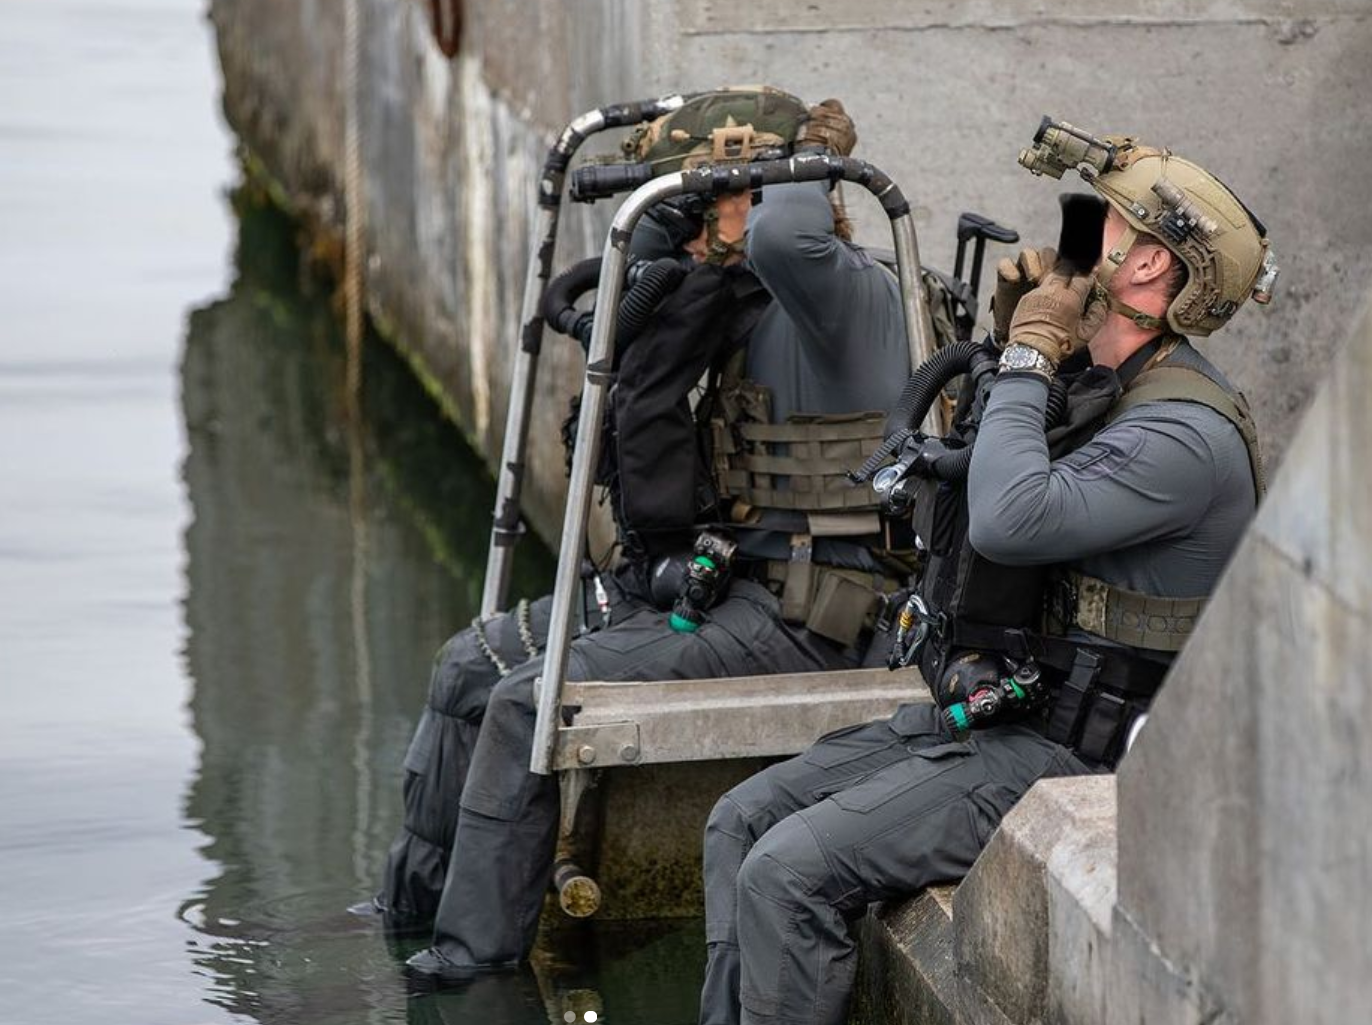 WOE Dispatch – tagged #SpecialOperations